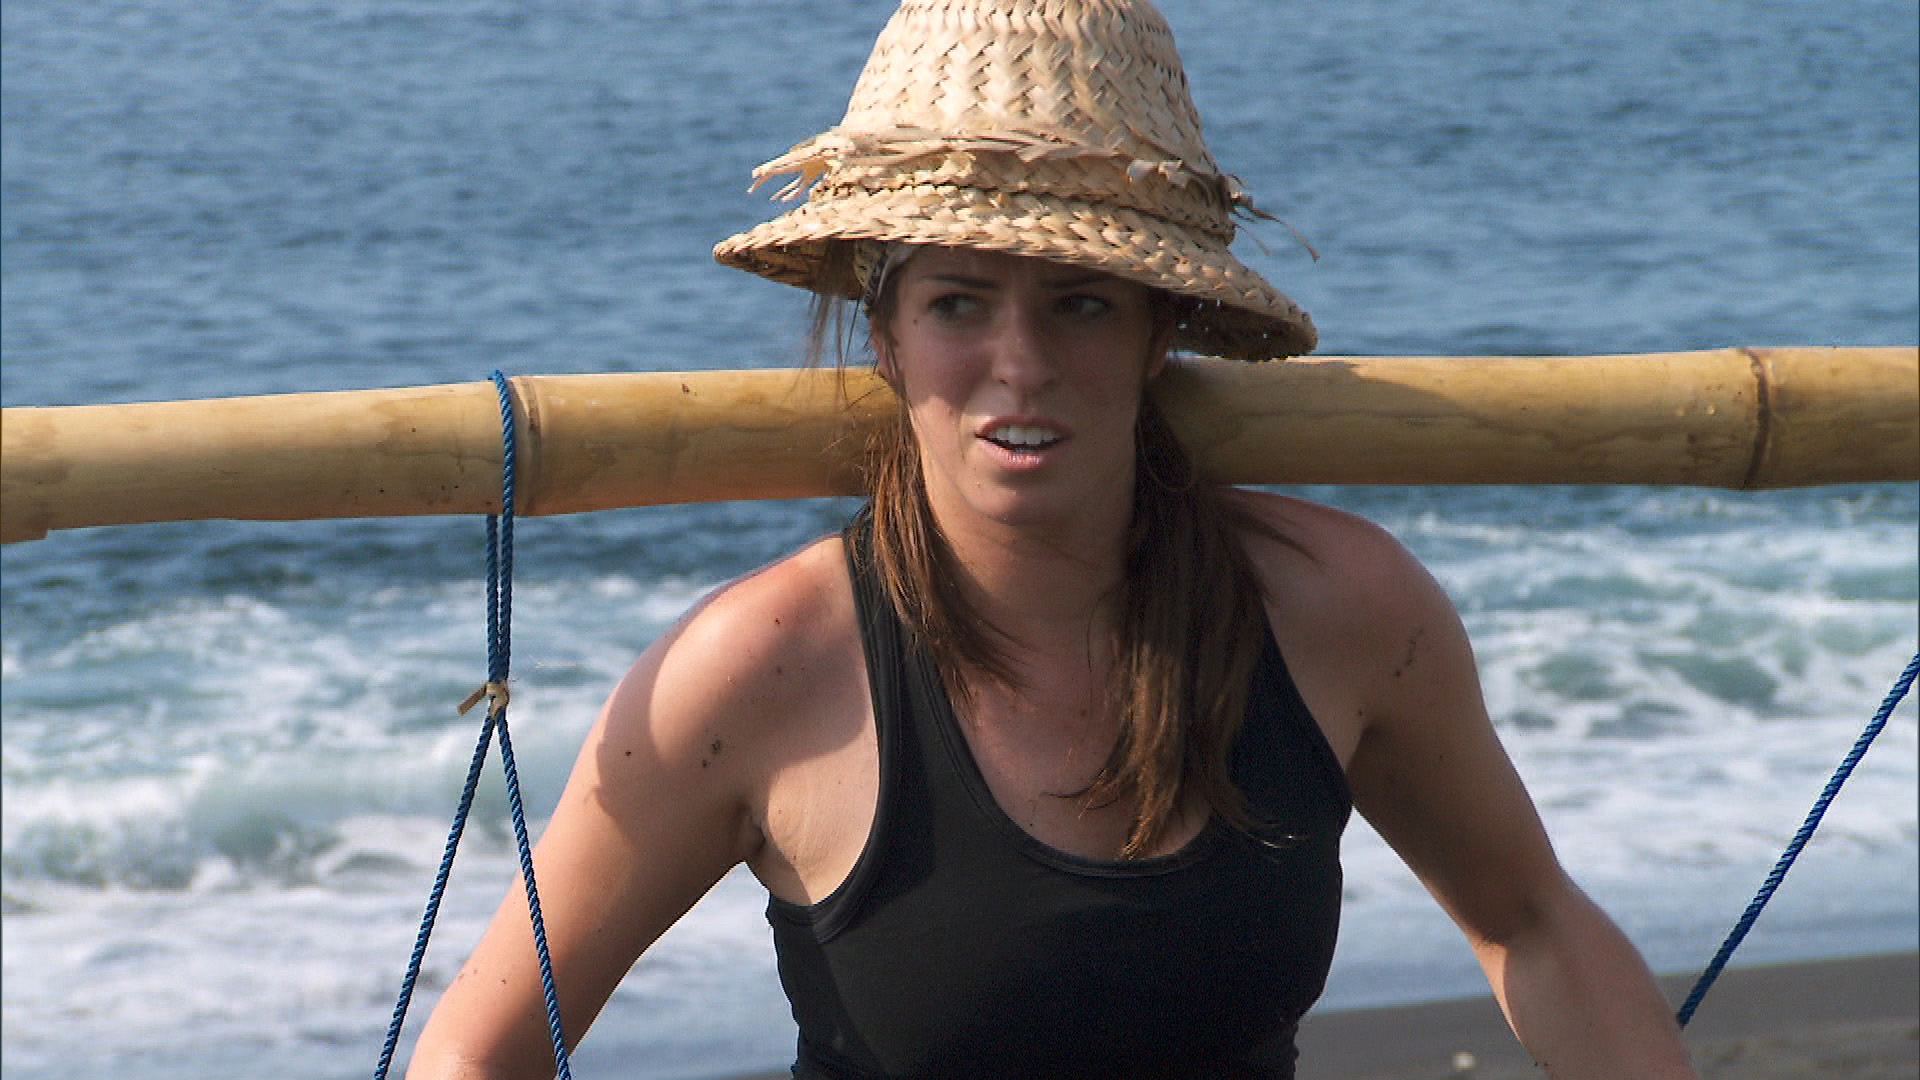 Rachel musters all the strength she has to continue on the next leg of The Amazing Race.